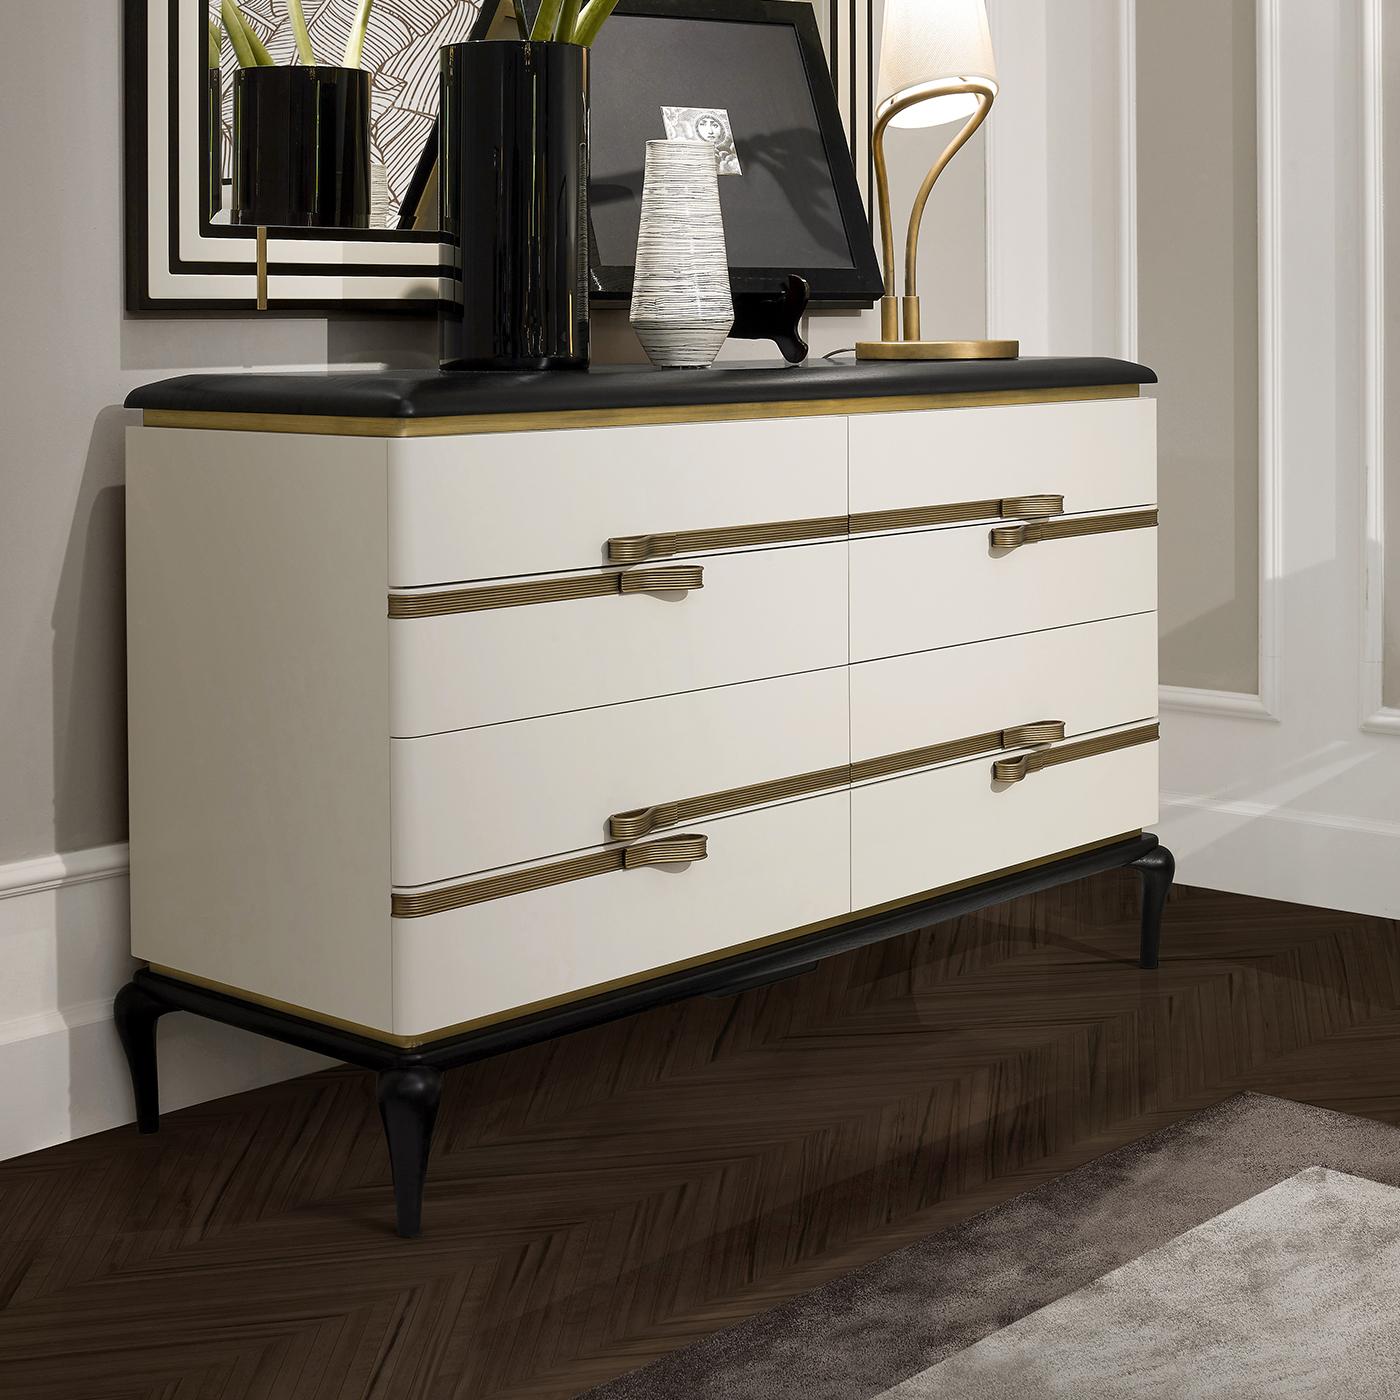 A statement piece to be paired with the white drawer and bedside table by the same designer to create a stunning, cohesive look in a modern bedroom, this splendid dresser is made of white-lacquered ash-veneered MDF and plywood, combined with a